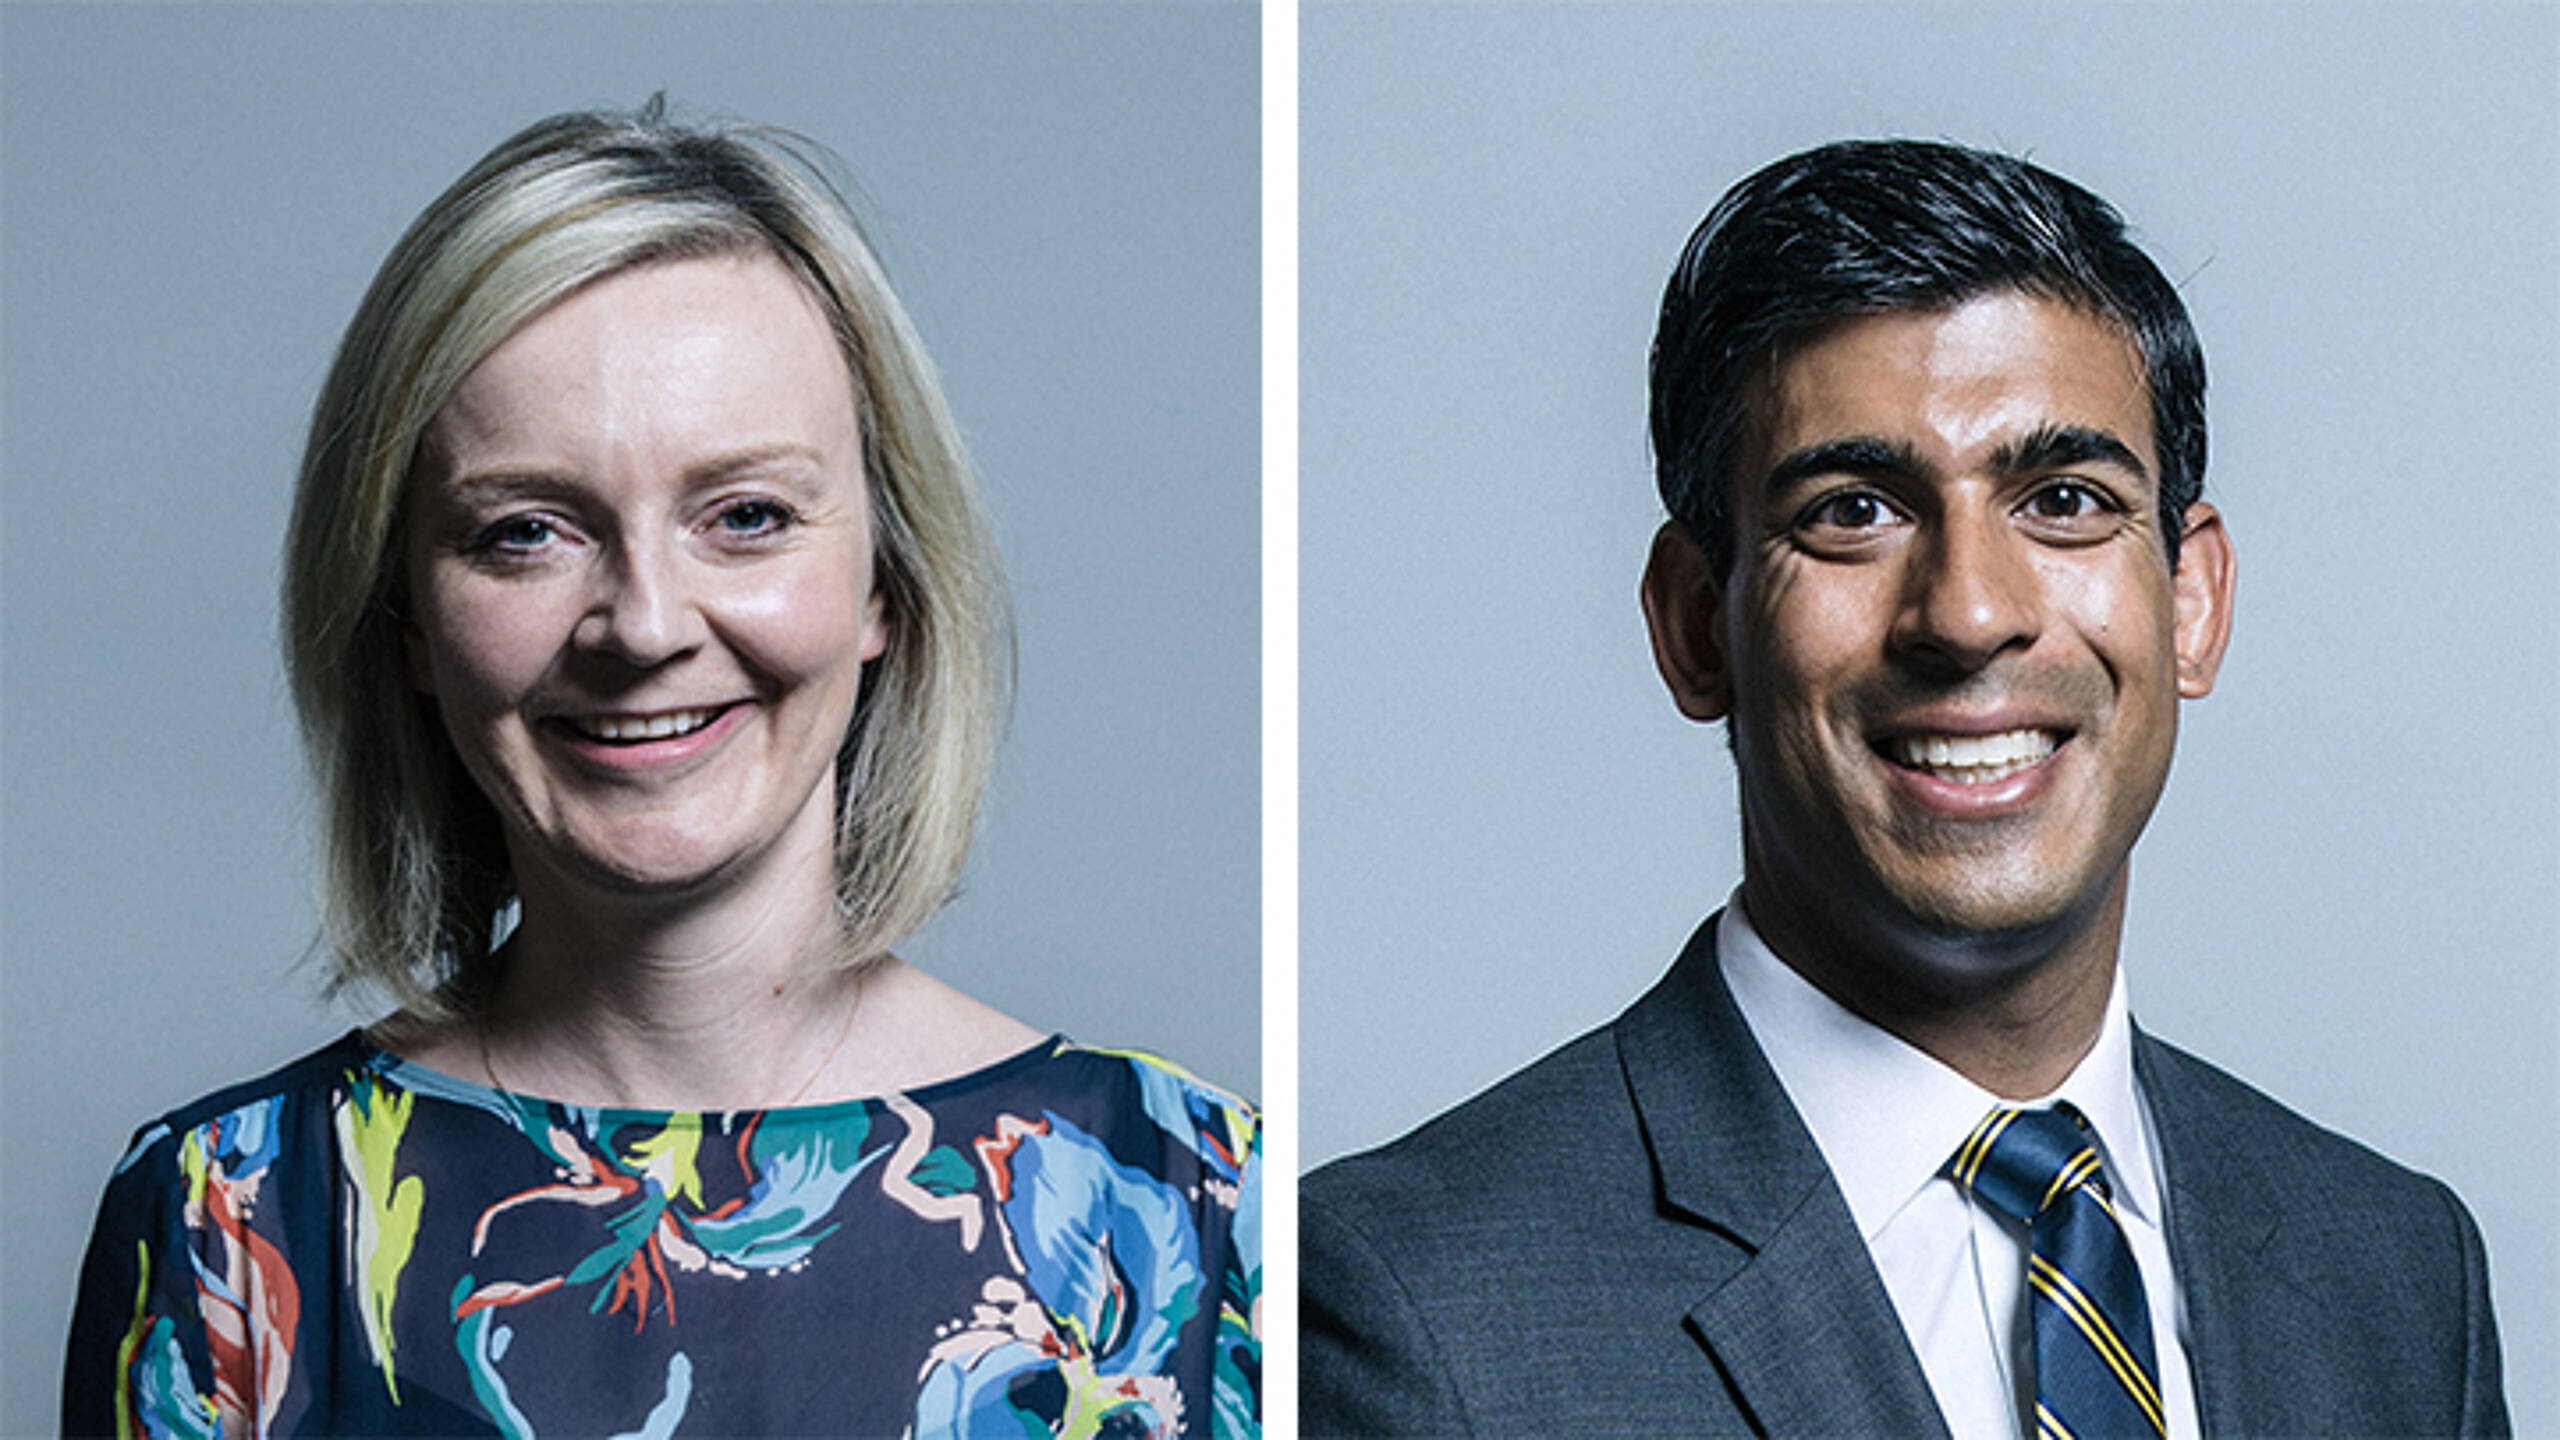 Truss v Sunak: Who is best placed to lead the country on climate and net-zero?